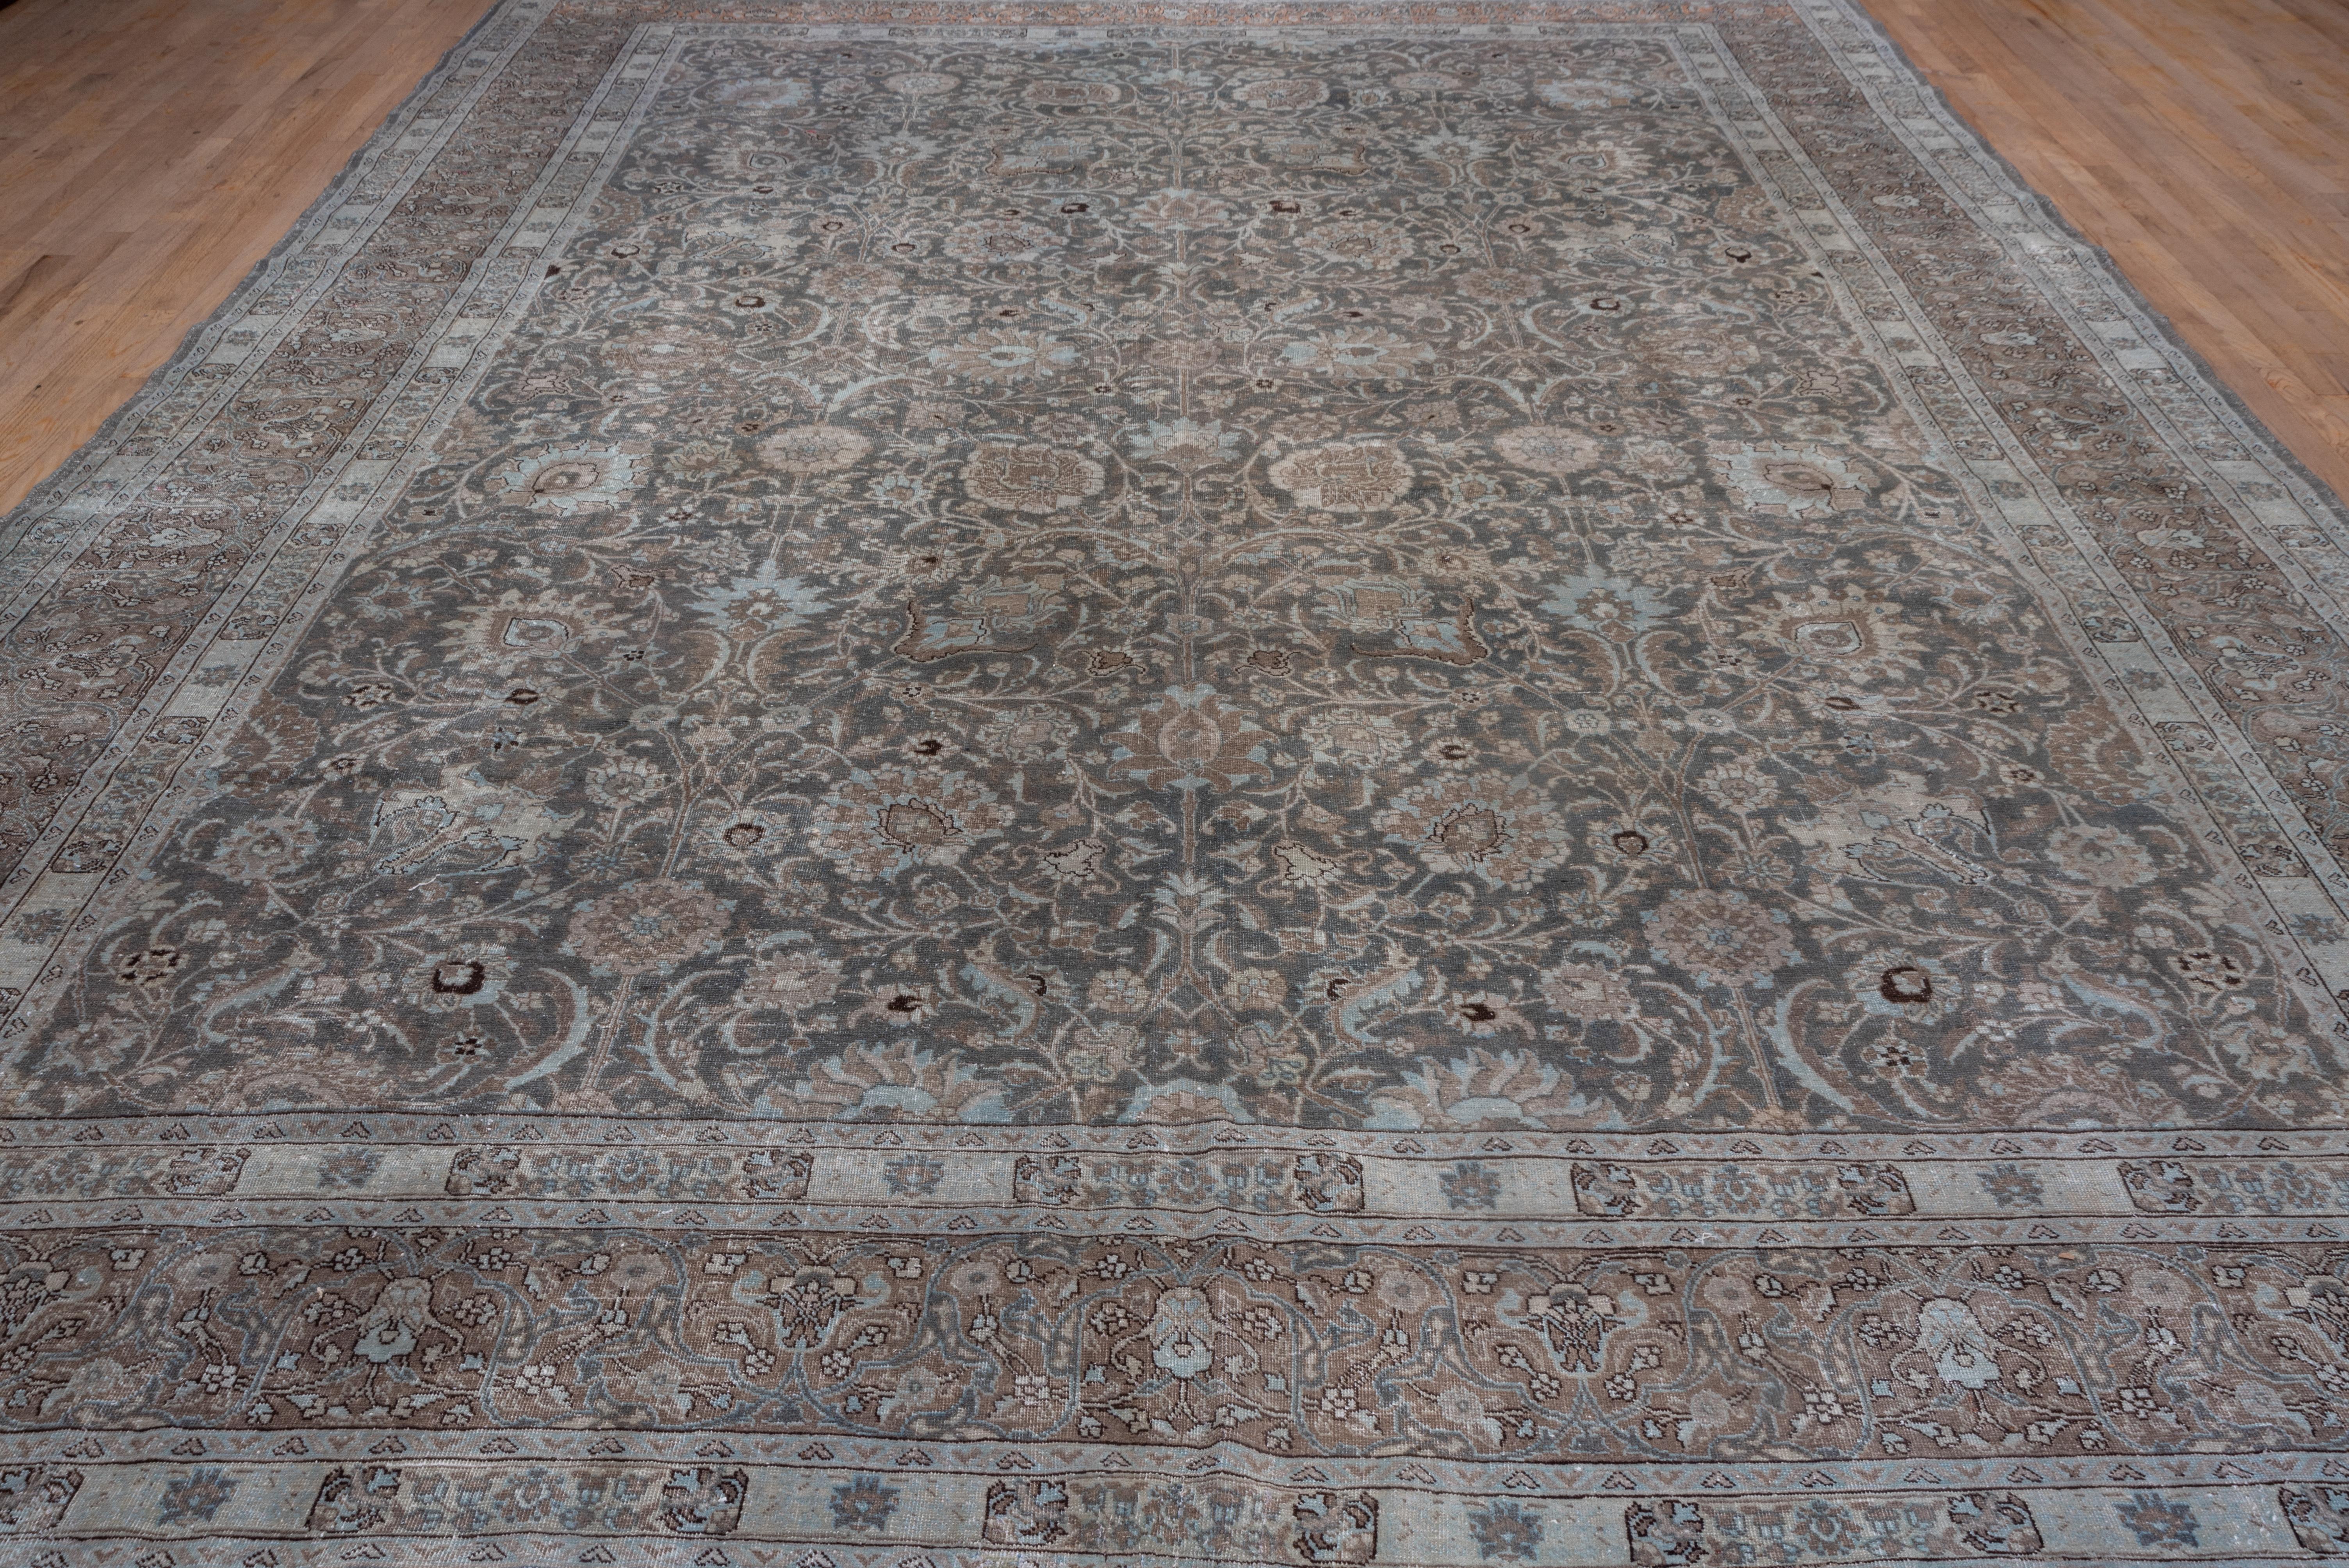 This NW Persian city carpet displays a well-drawn version of the classic 'Vase carpet